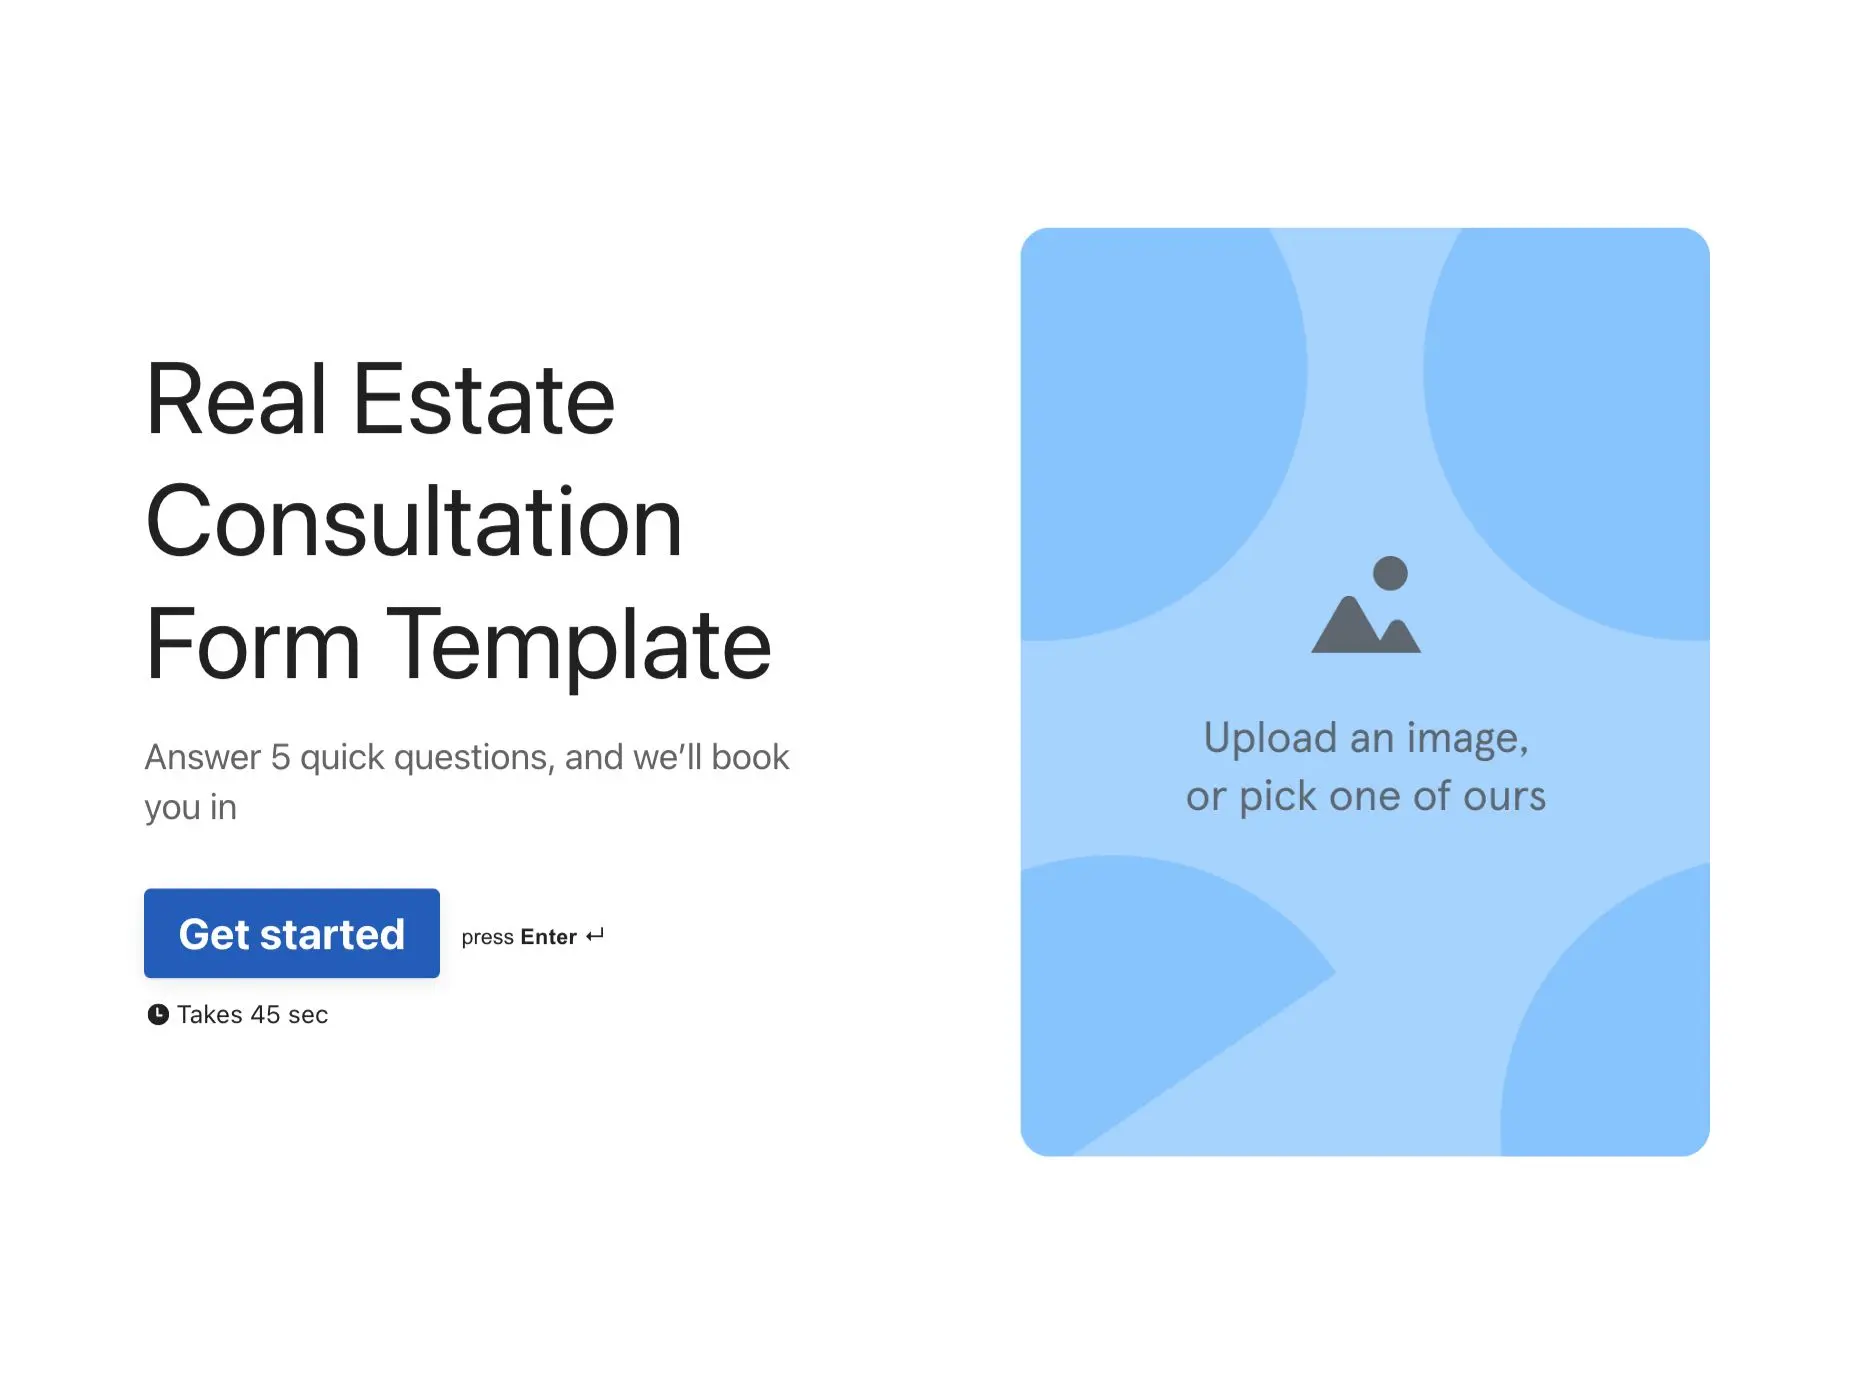 Real Estate Consultation Form Template Hero